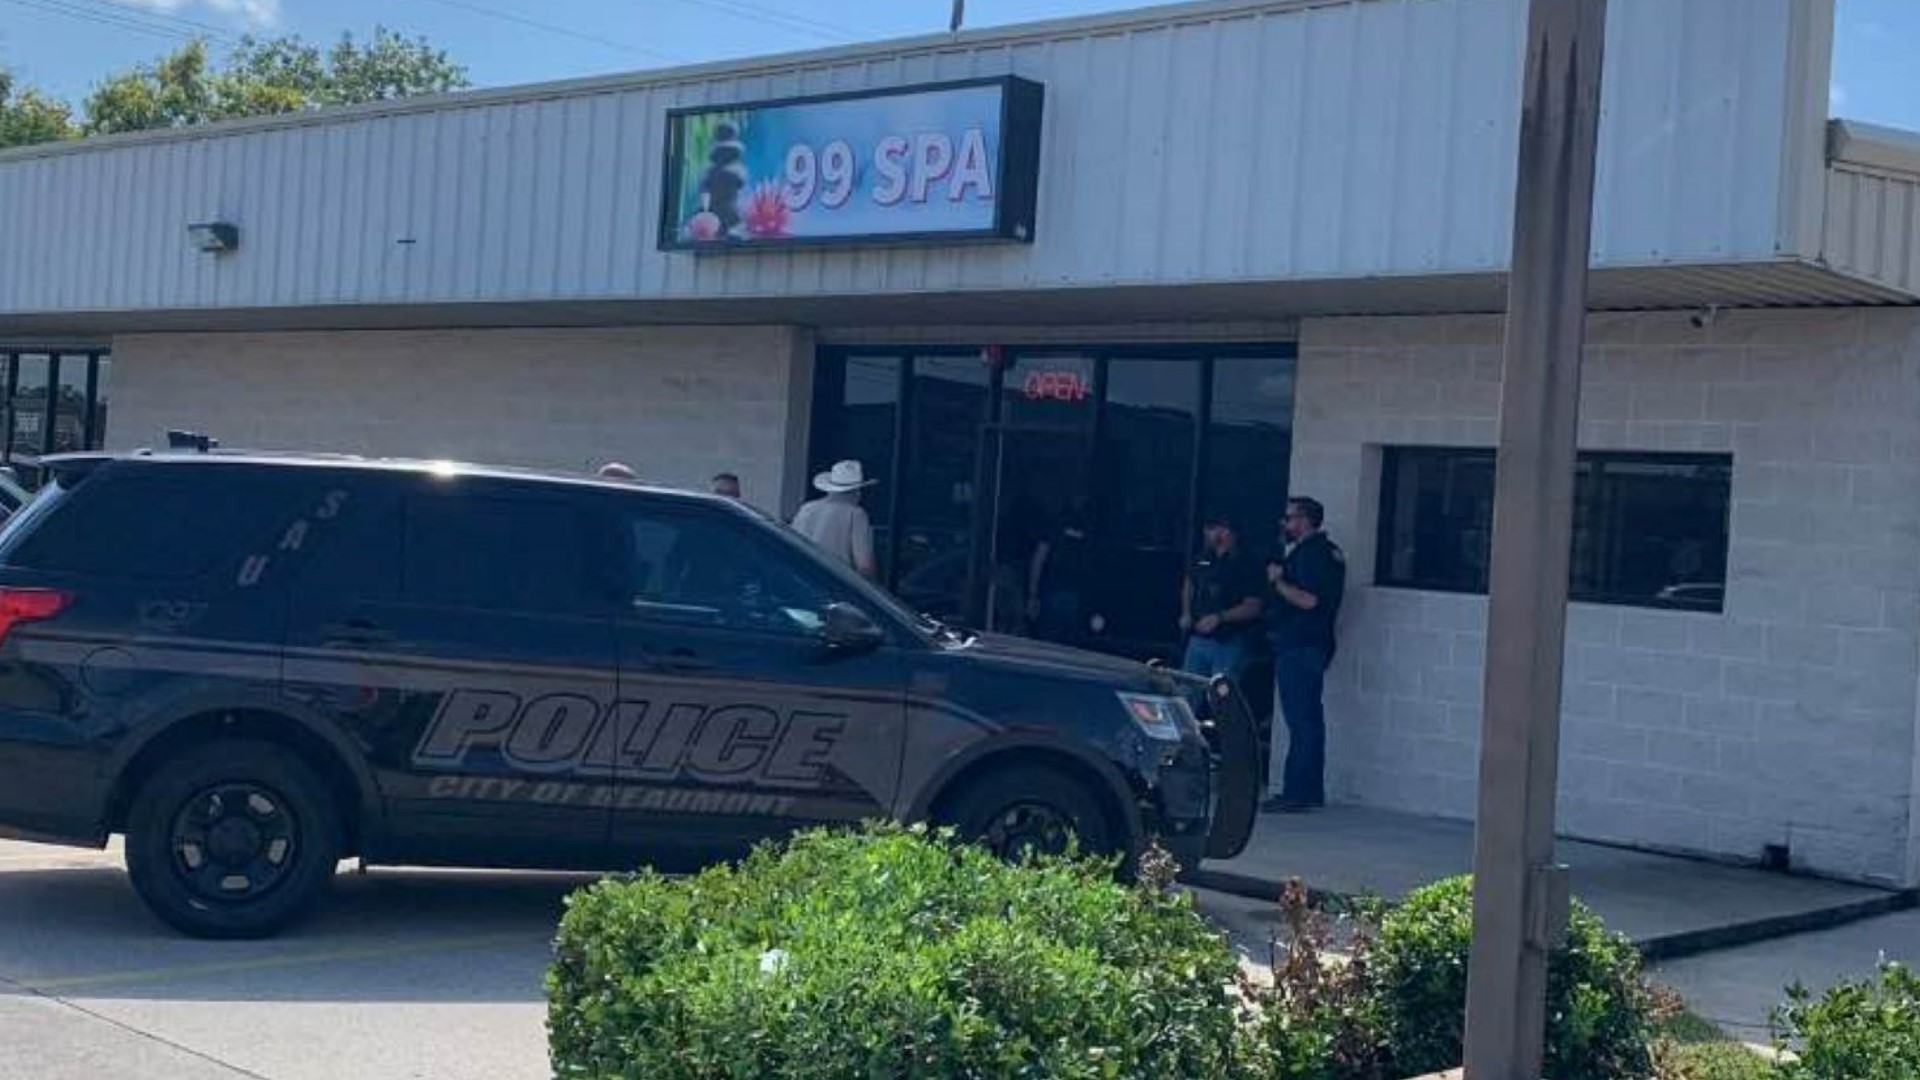 Police found two women living and working inside the business without a license